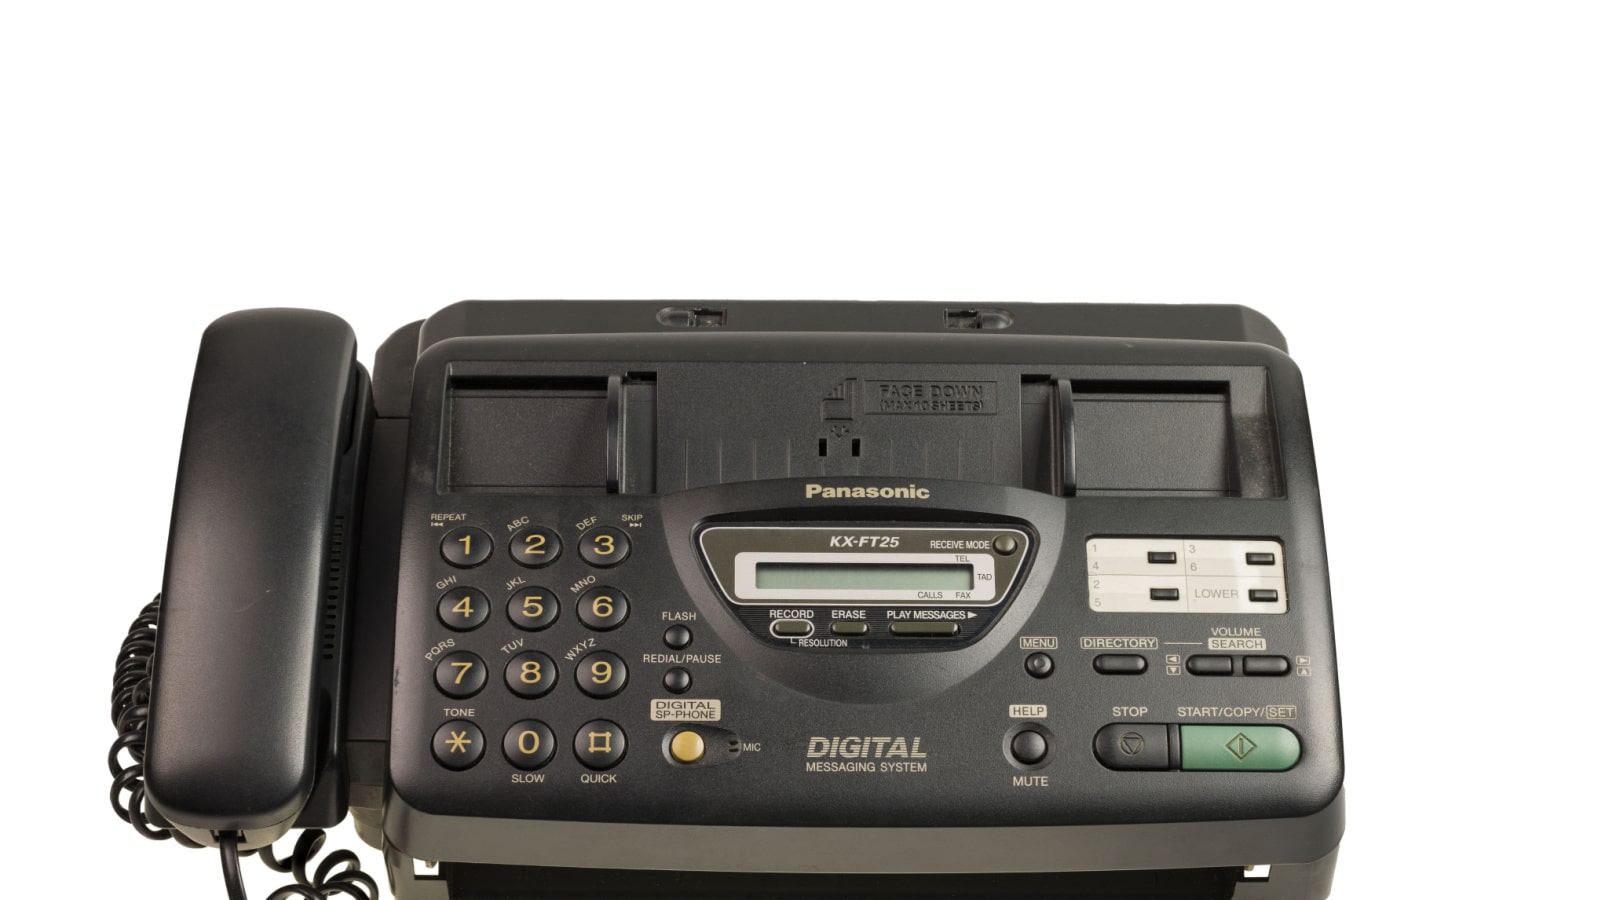 Close up view of old Panasonic fax phone isolated on white background. Sweden. Uppsala. 11.13.2022.